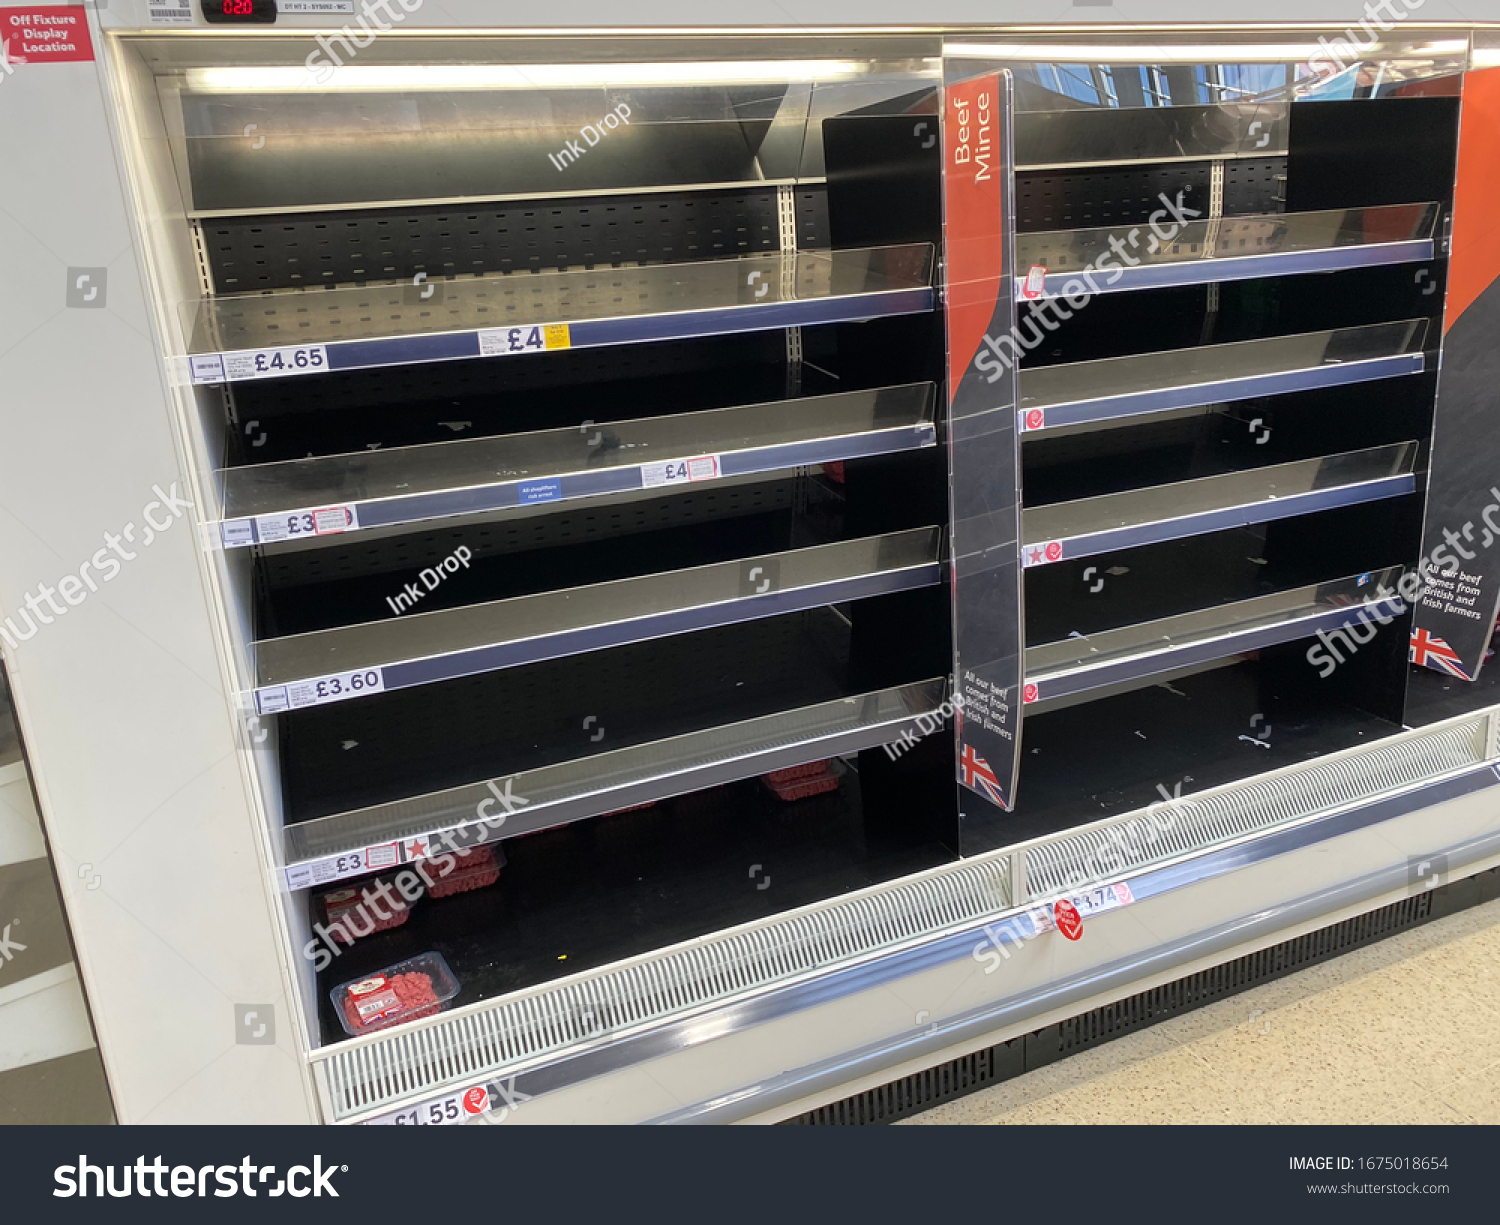 OXFORD, UK - March 16th 2020: Empty supermarket shelves at a local grocery store as people prepare for coronavirus lockdown #1675018654